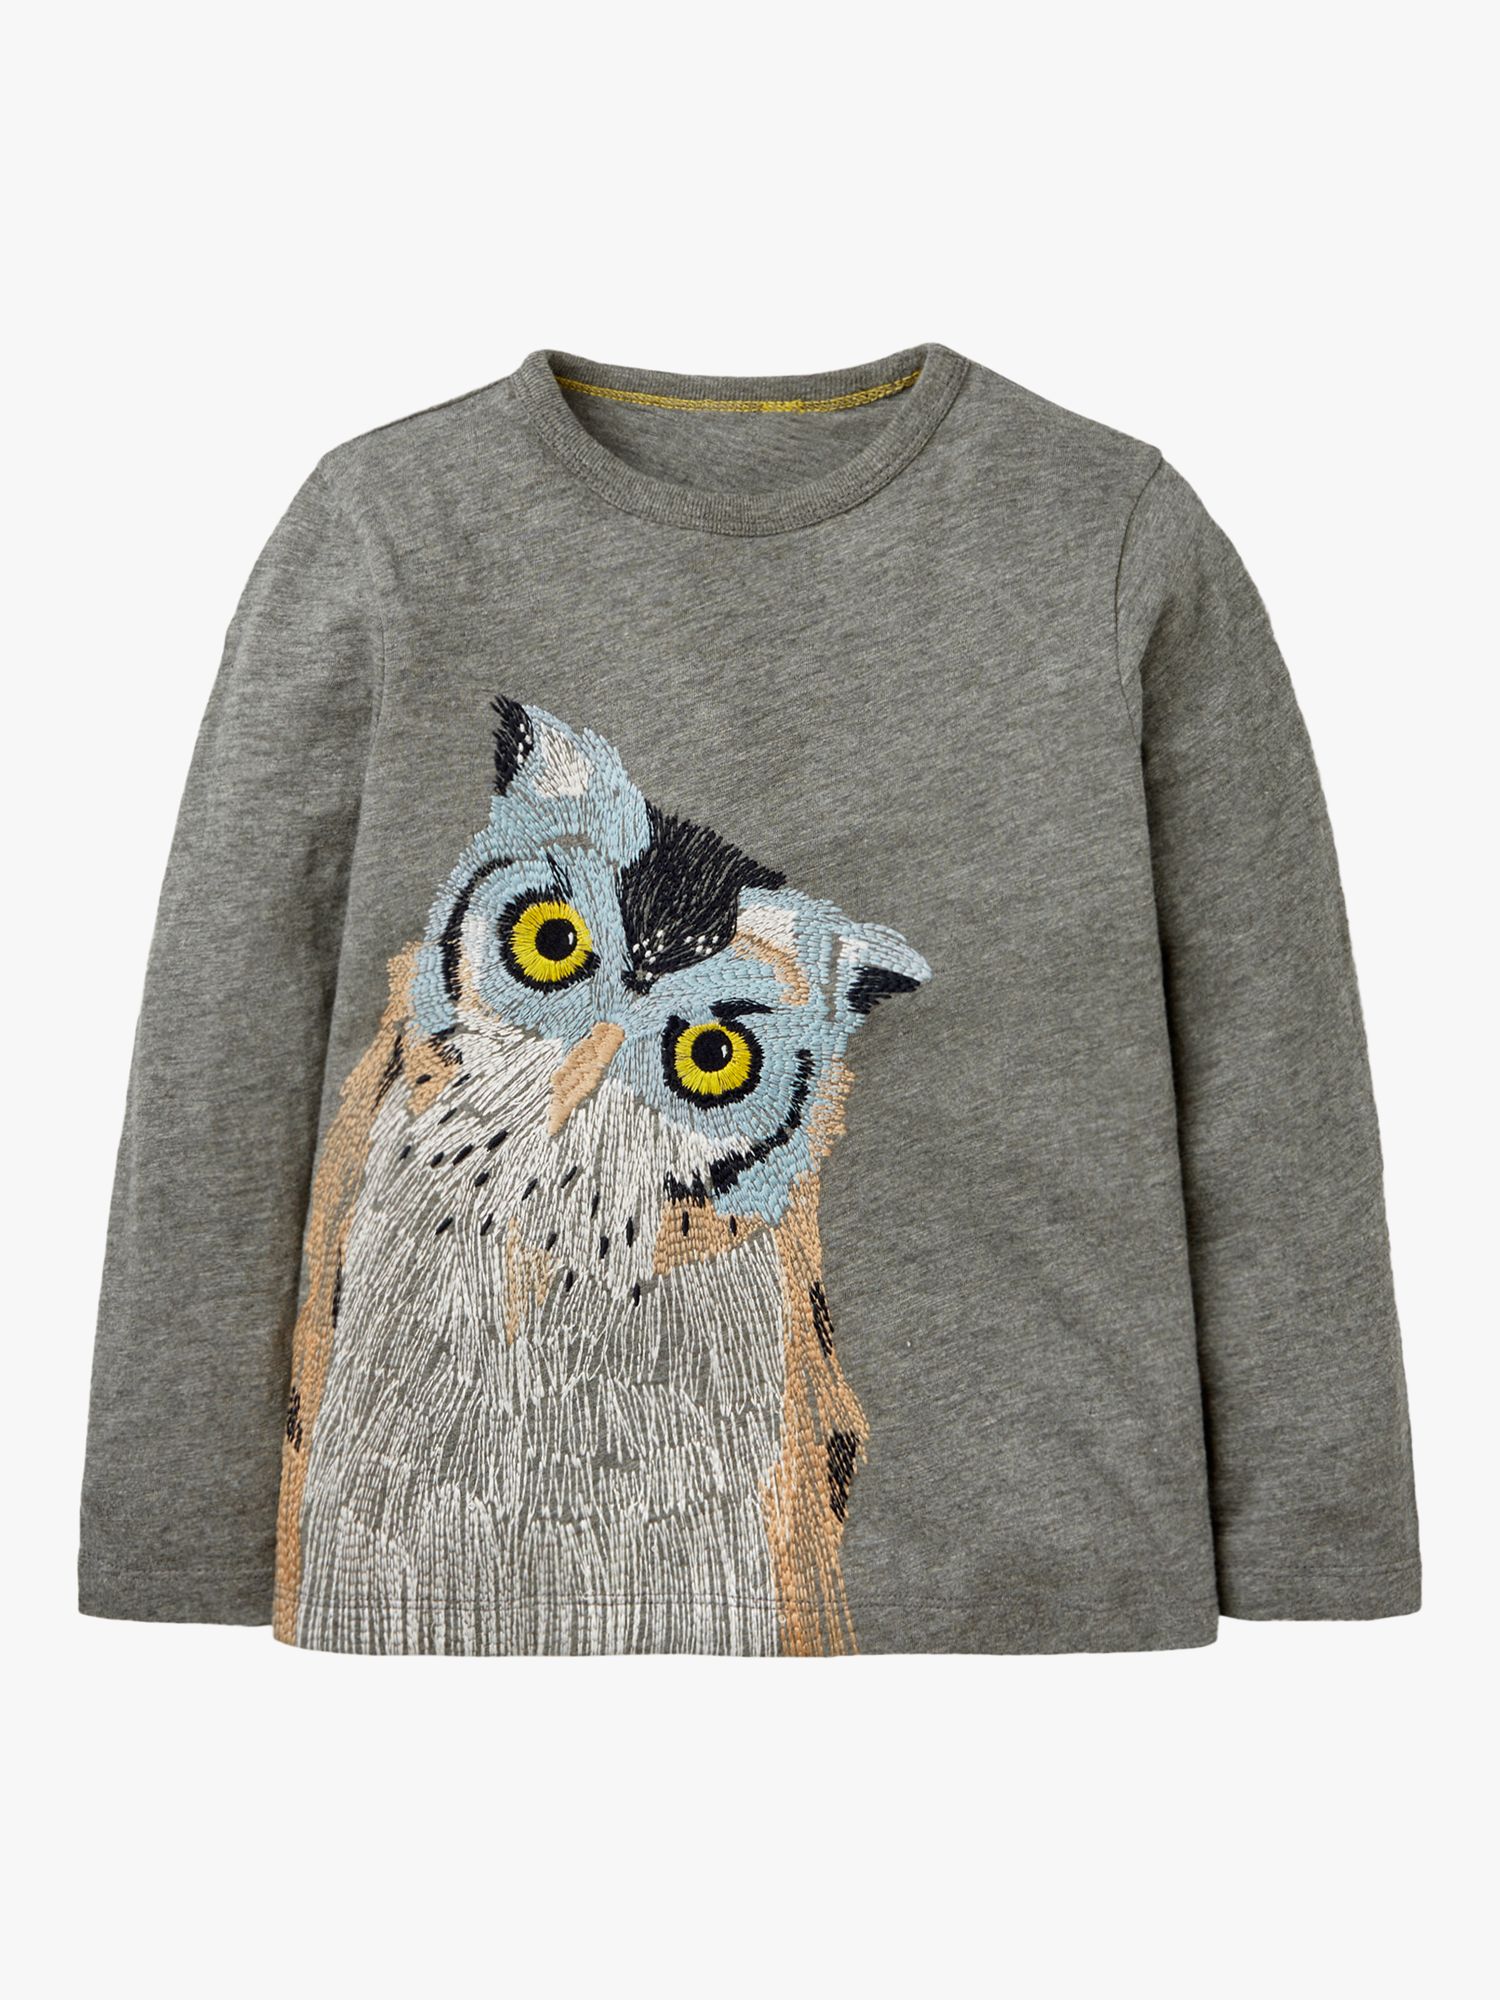 Image of Mini Boden Boys Superstitch Owl TShirt Charcoal